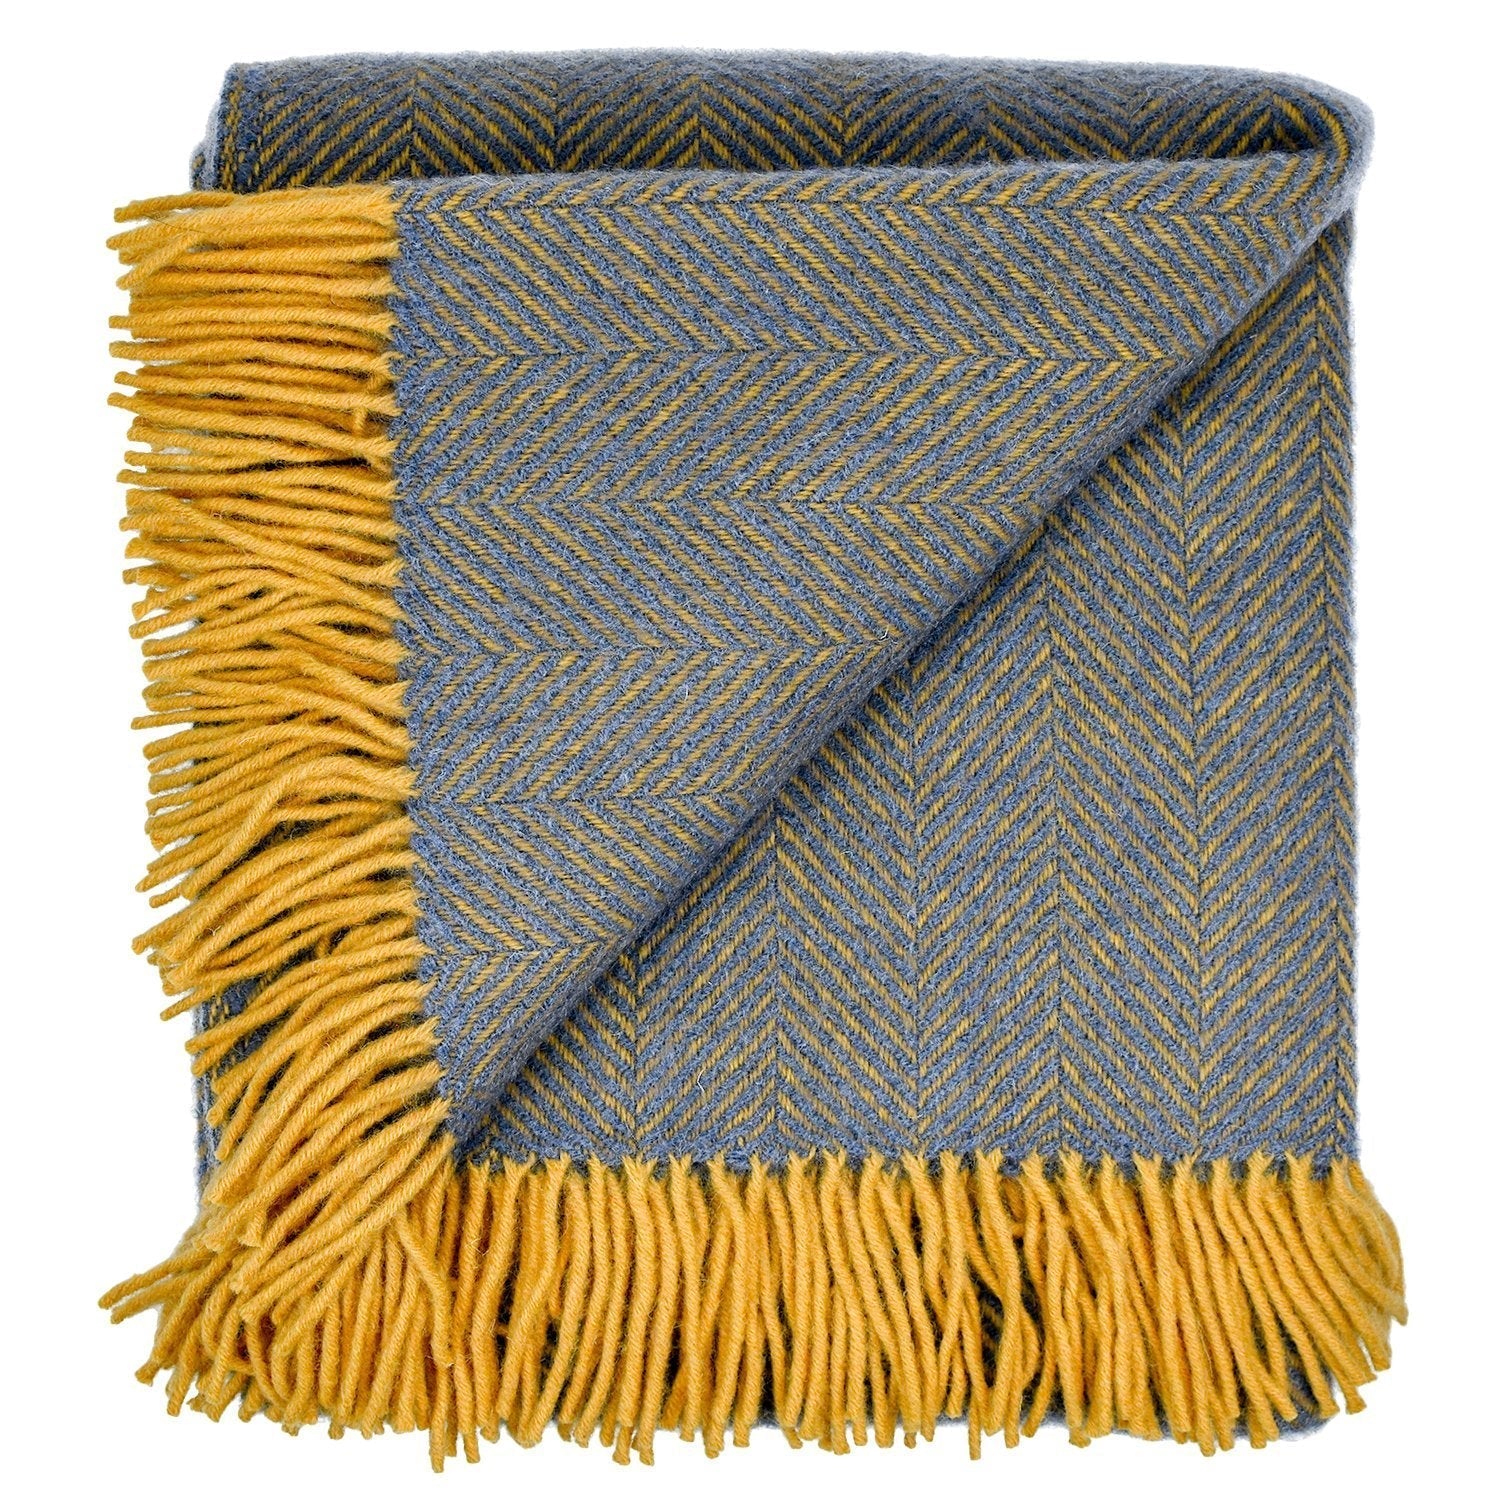 Highland Tweed Herringbone Pure New Wool Throw ~ Navy/Gold ~-Throws and Blankets-Prince of Scots-00810032750039-K4050030-011-Prince of Scots